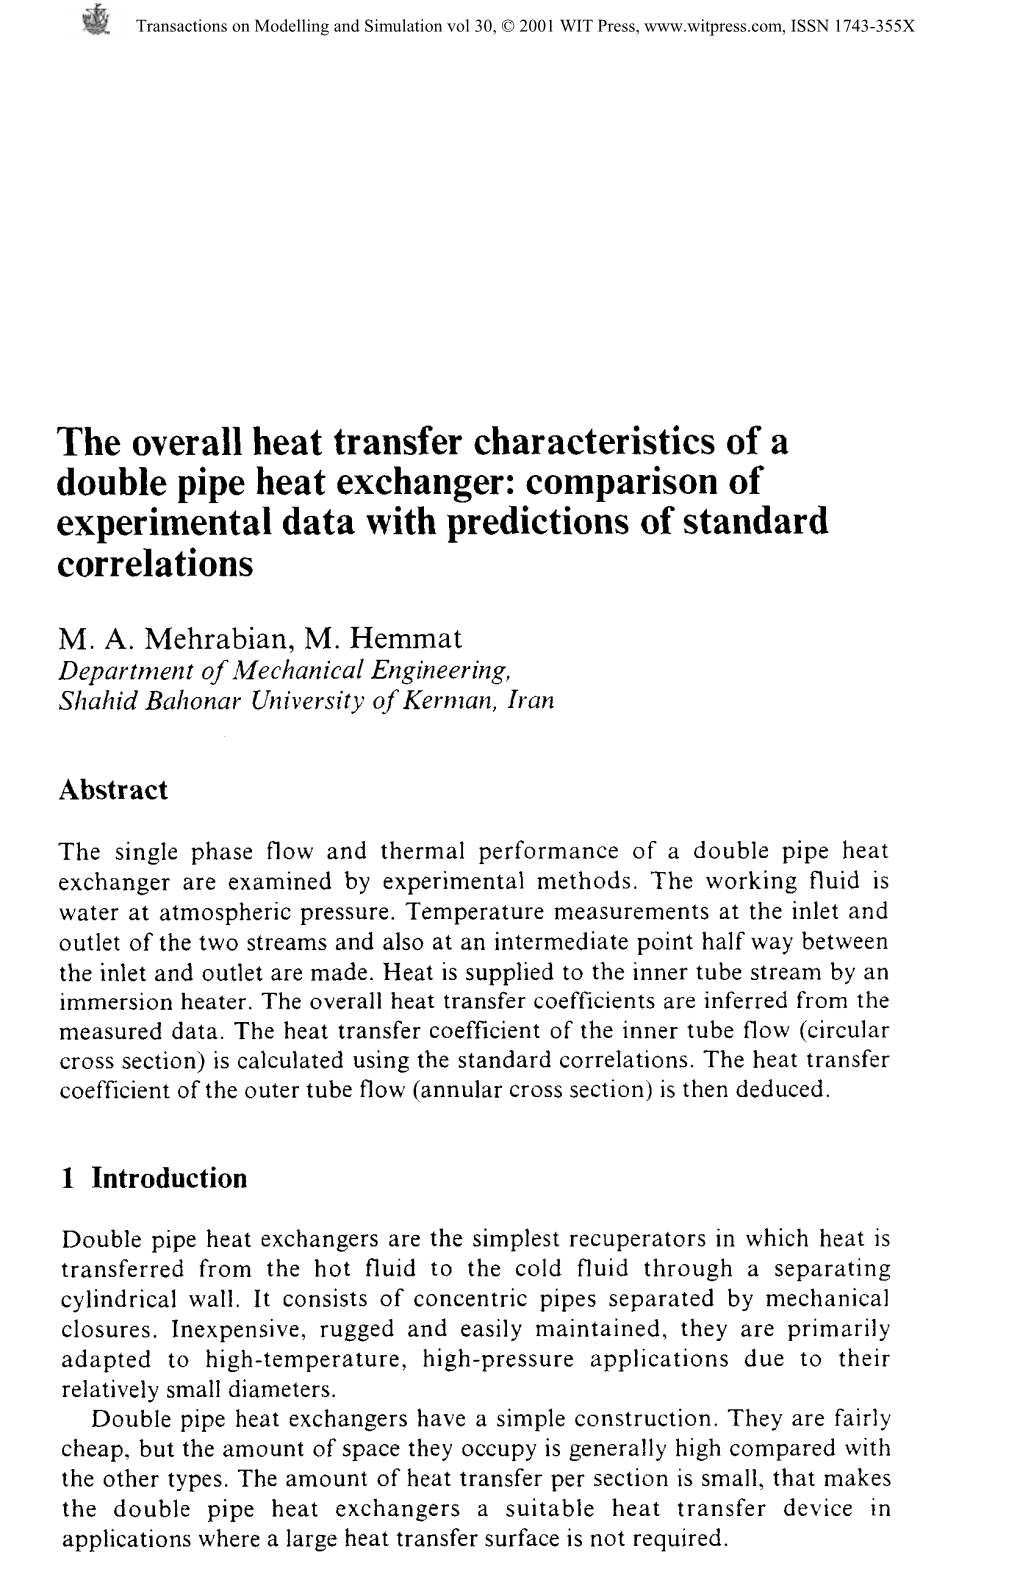 The Overall Heat Transfer Characteristics of a Double Pipe Heat Exchanger: Comparison of Experimental Data with Predictions of Standard Correlations